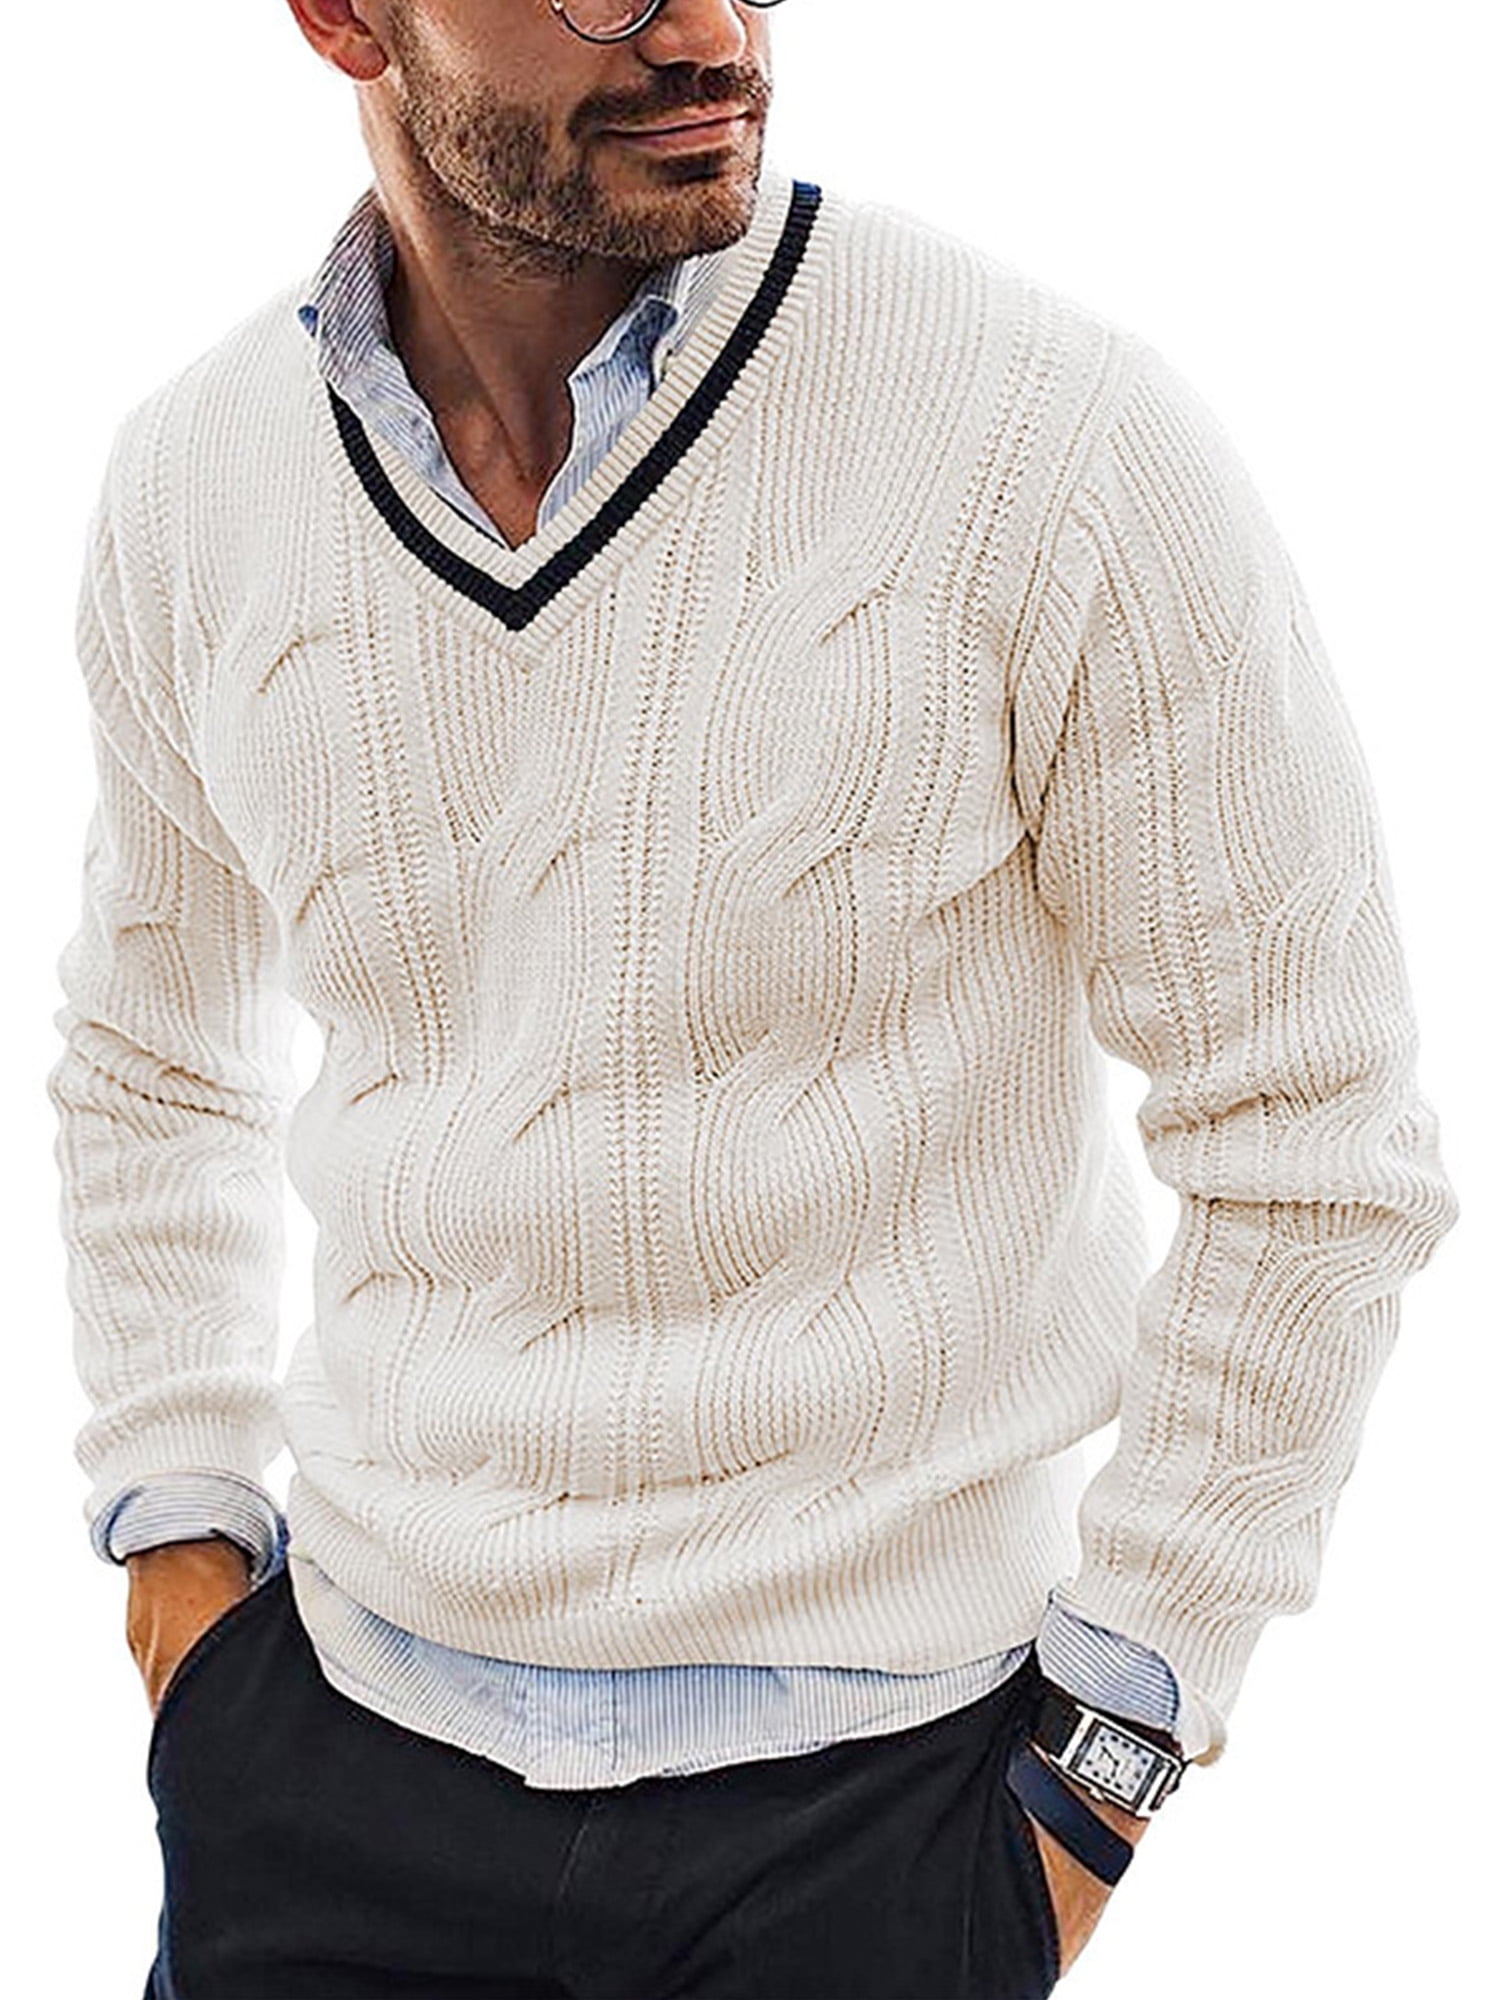 Glookwis Mens Cable Knit Sweater Slim Fit Jumper Tops Stretch Knitwear  Pullover Long Sleeve V Neck Outwear Sweaters White L 